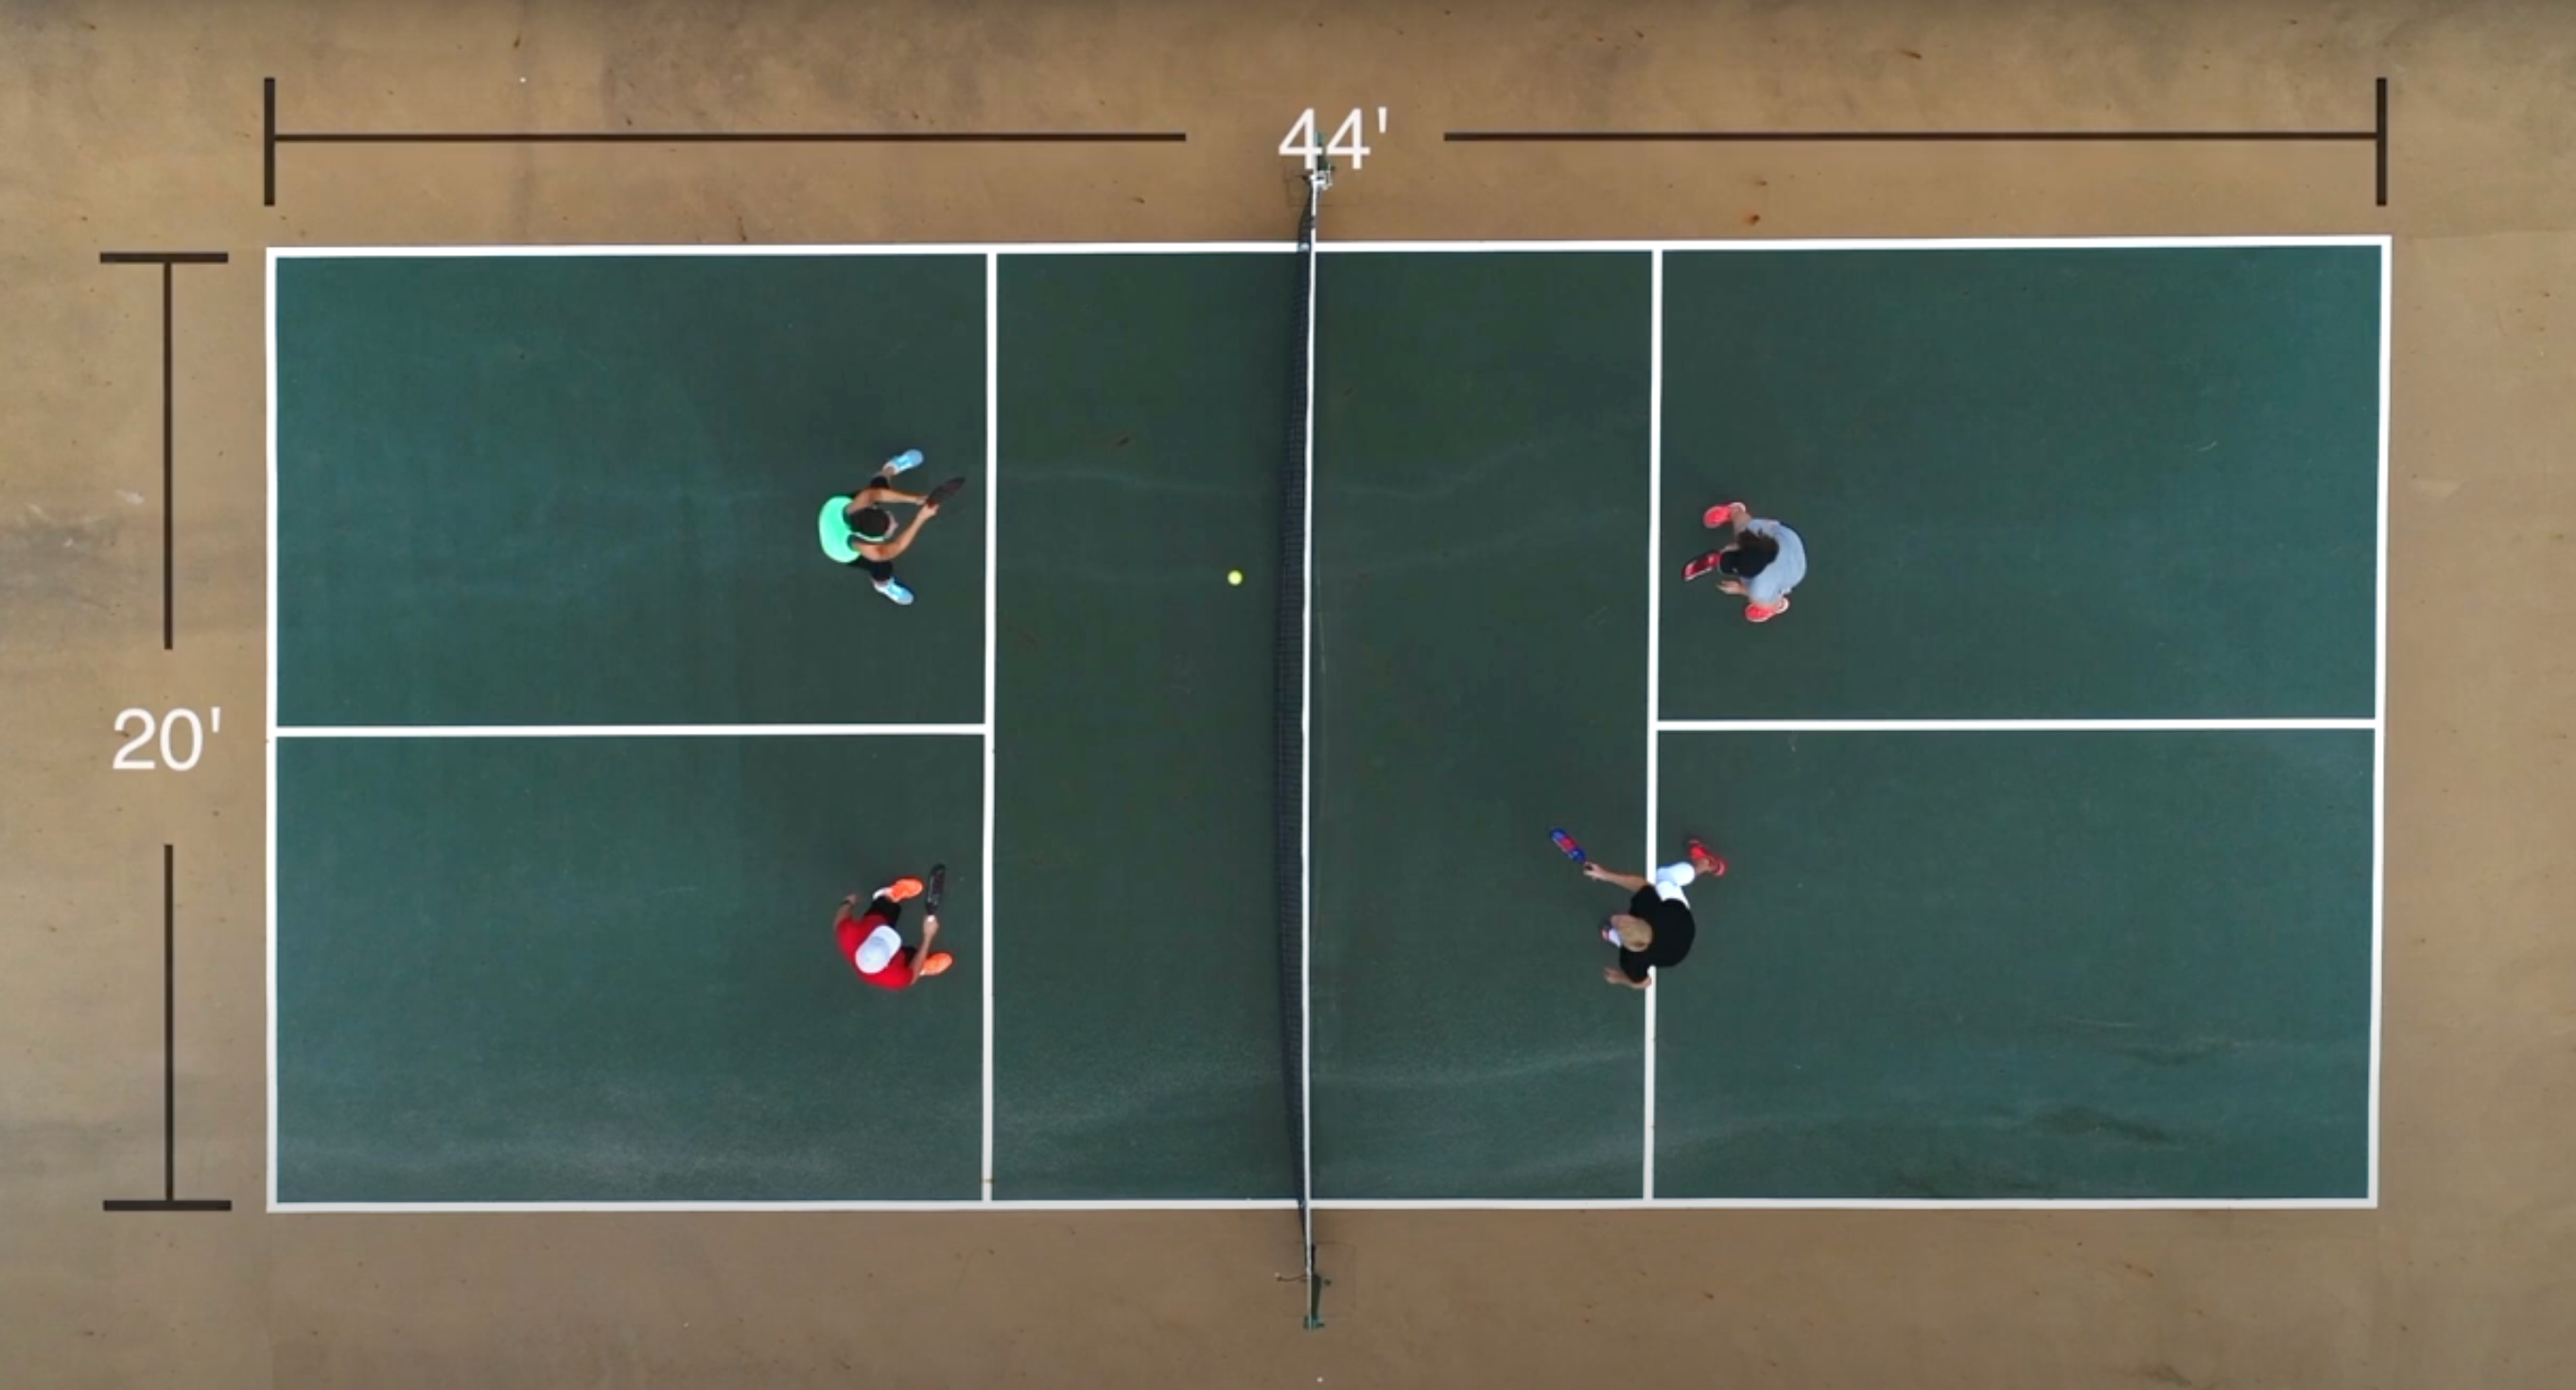 An overhead shot shows a pickleball court from above. Four players stand at the kitchen line and graphics show the court dimensions, 44 feet in length and 20 feet in width.